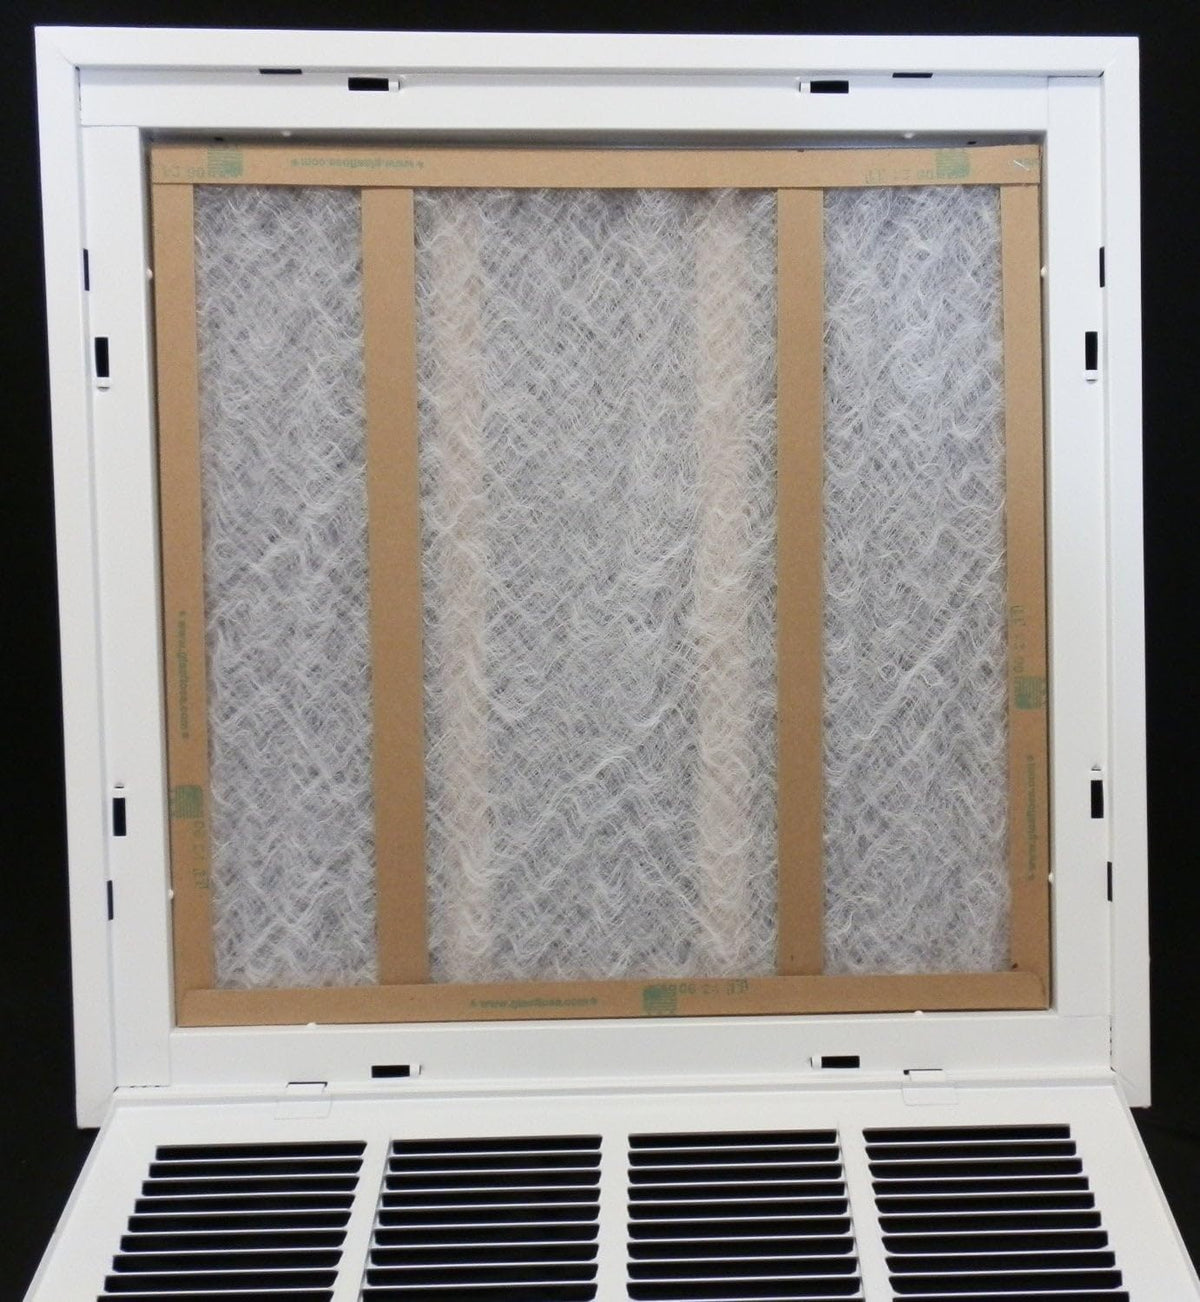 12&quot; X 34&quot; Steel Return Air Filter Grille for 1&quot; Filter - Removable Frame - [Outer Dimensions: 14 5/8&quot; X 36 5/8&quot;]